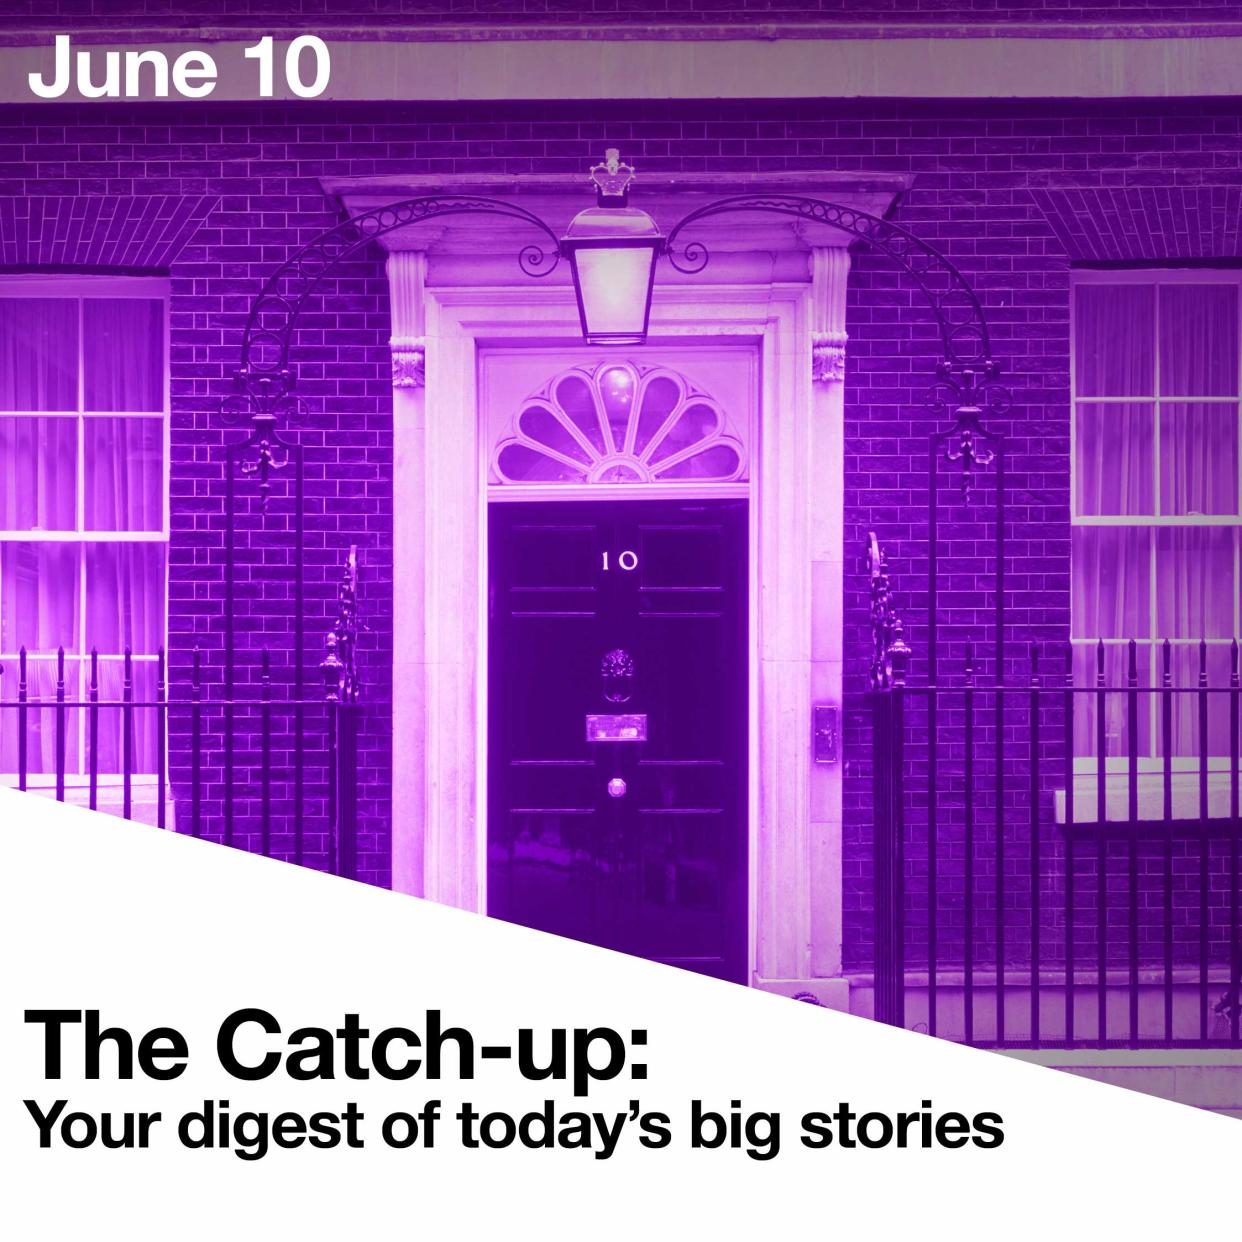 The Catch-up 10 June